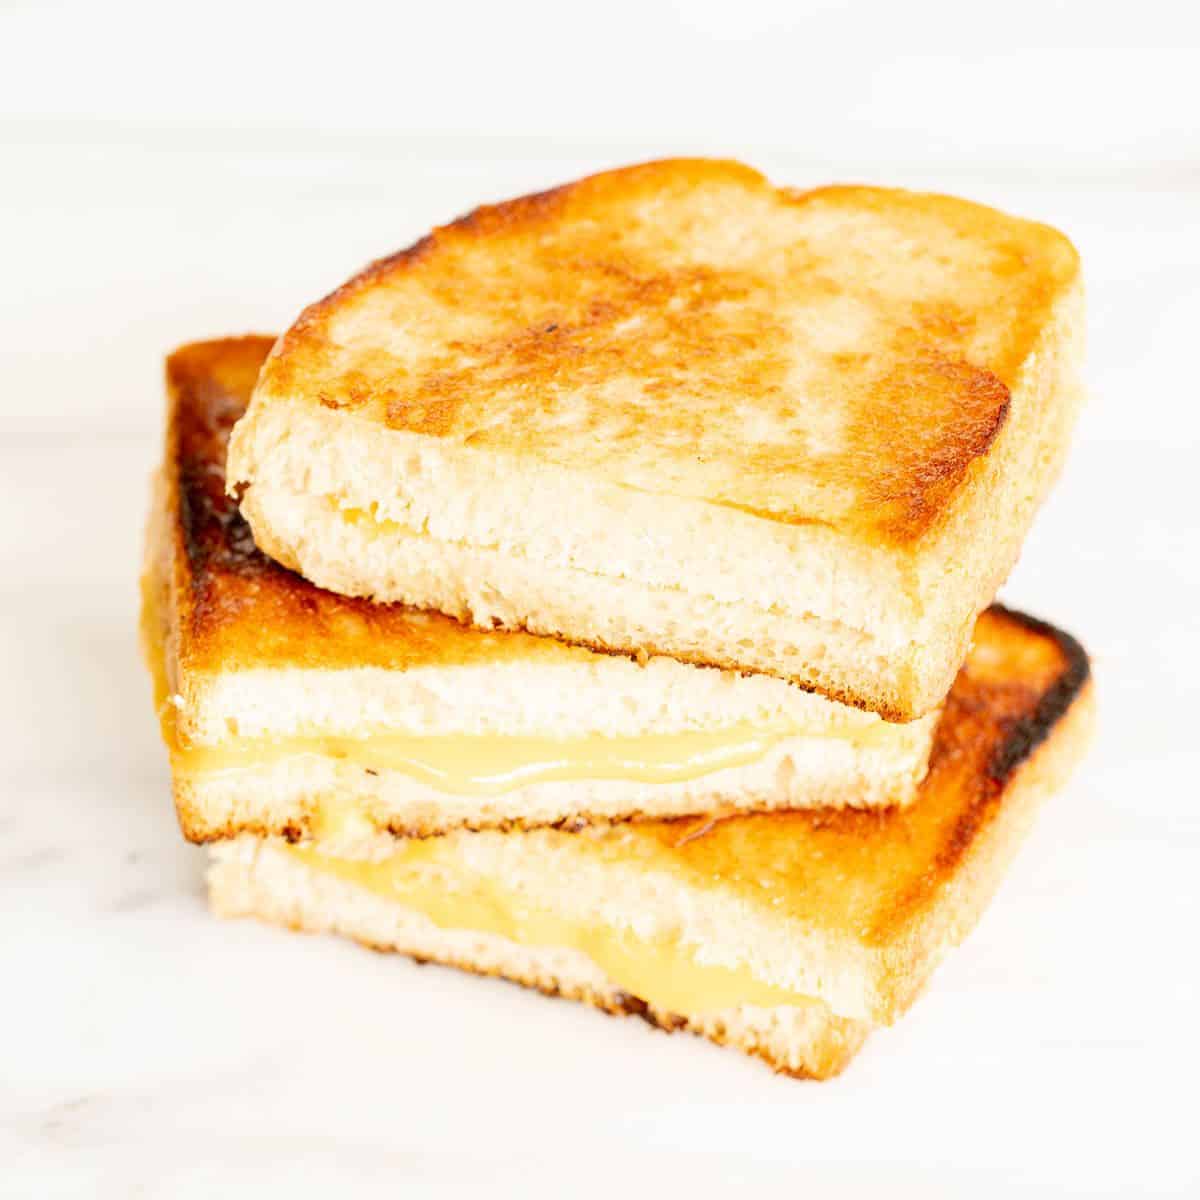 https://julieblanner.com/wp-content/uploads/2021/07/mayo-grilled-cheese-4.jpeg